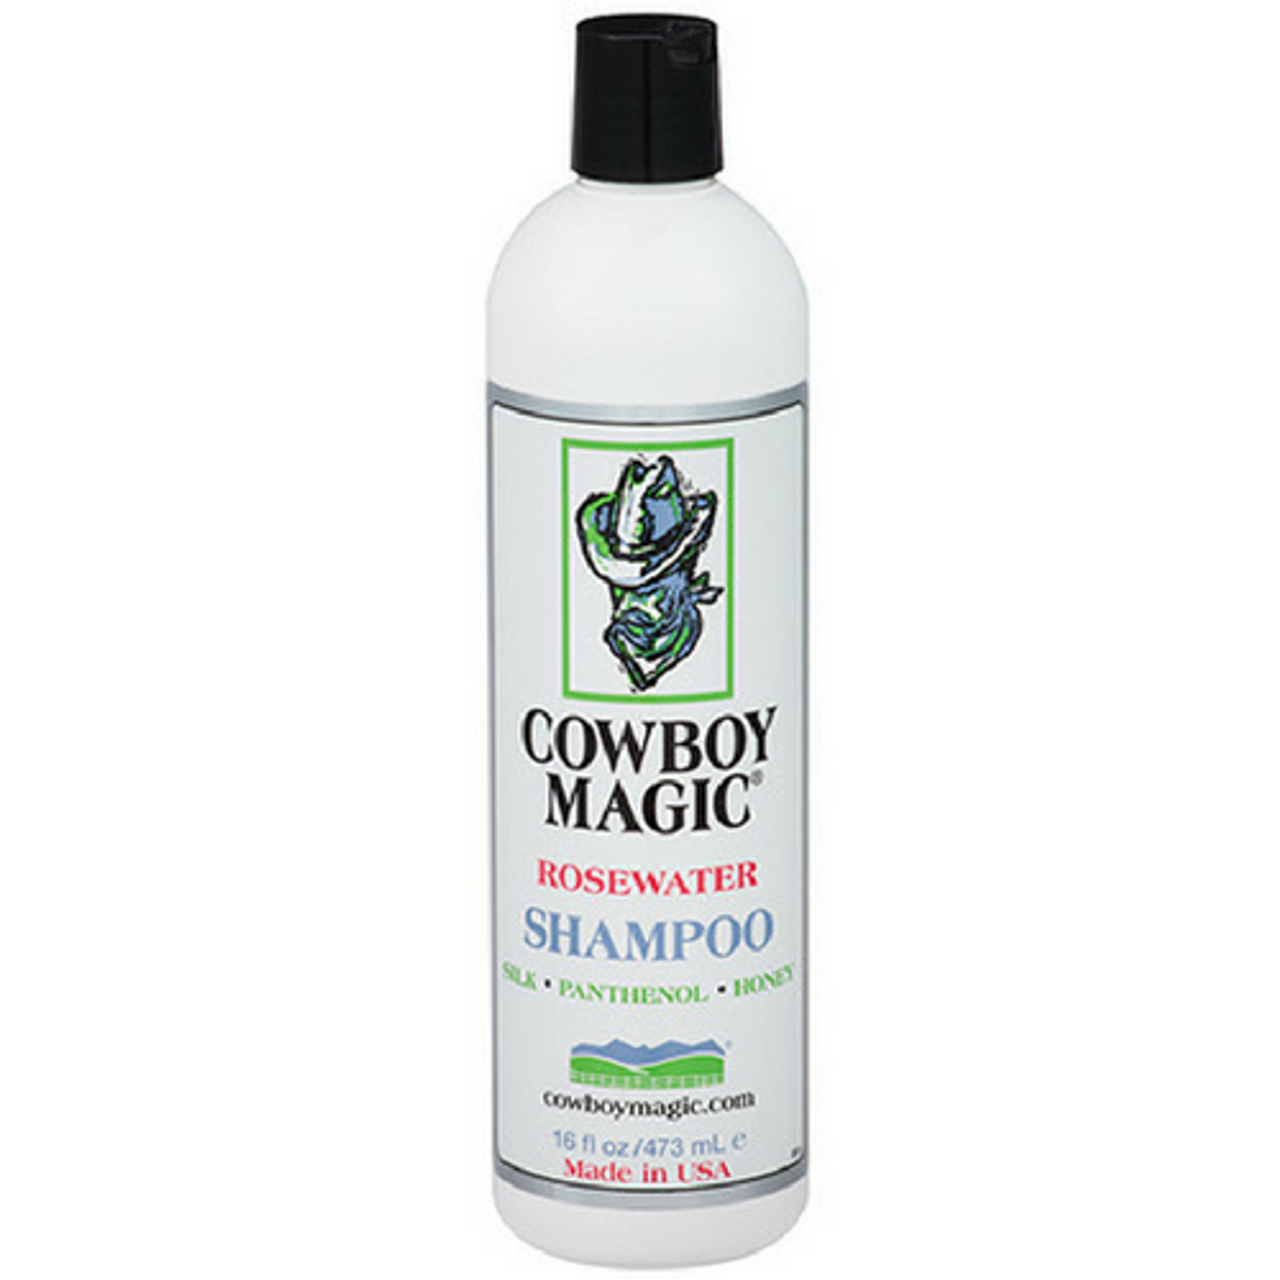 https://cdn11.bigcommerce.com/s-9and3/images/stencil/1280x1280/products/2017/6453/Cowboy_Magic_Rosewater_Shampoo_16_oz__47588.1502300002.png?c=2